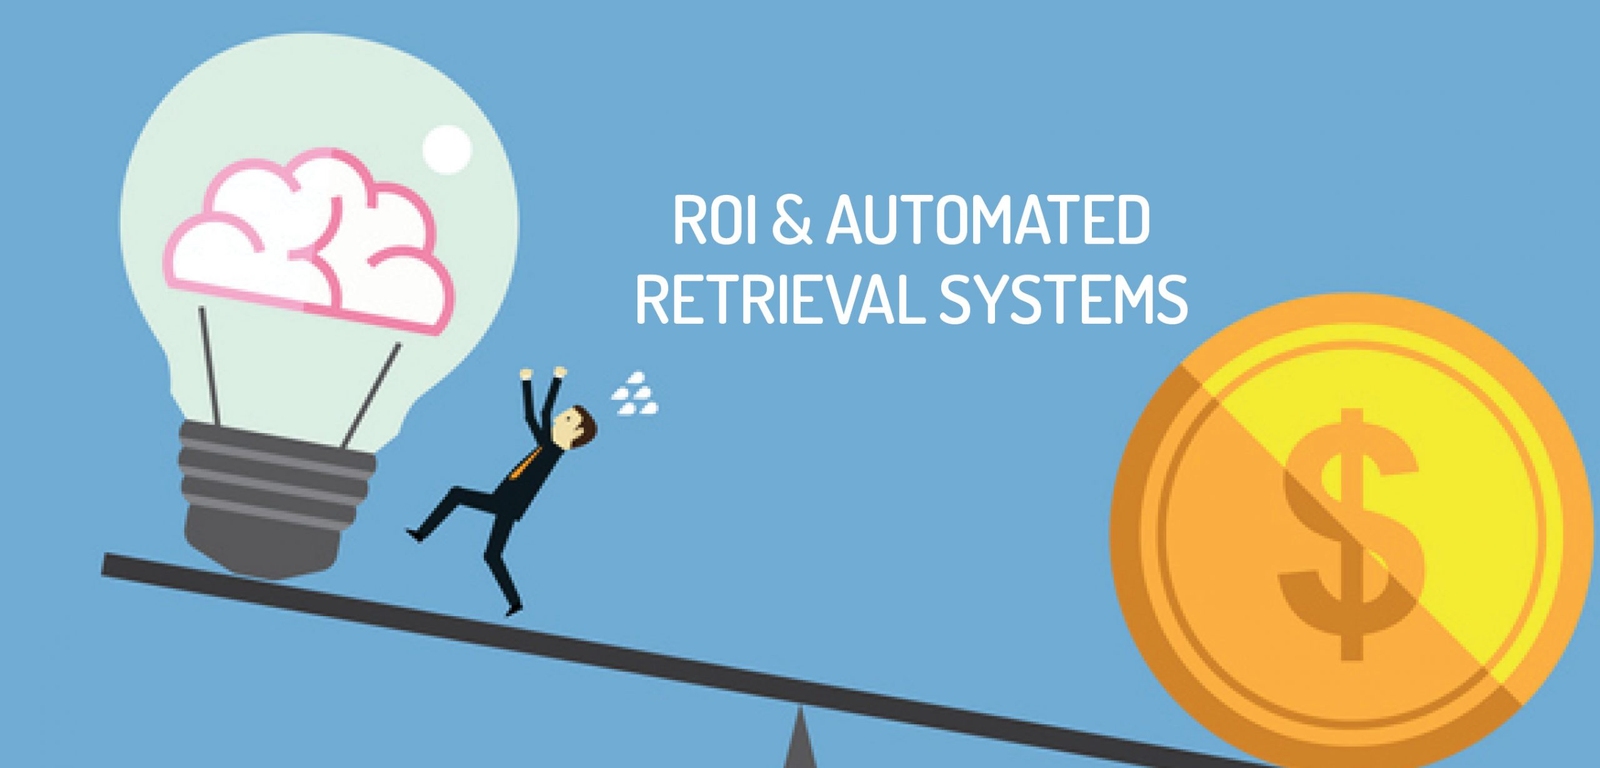 Advantages of Automated Storage Retrieval Systems – What’s the ROI?